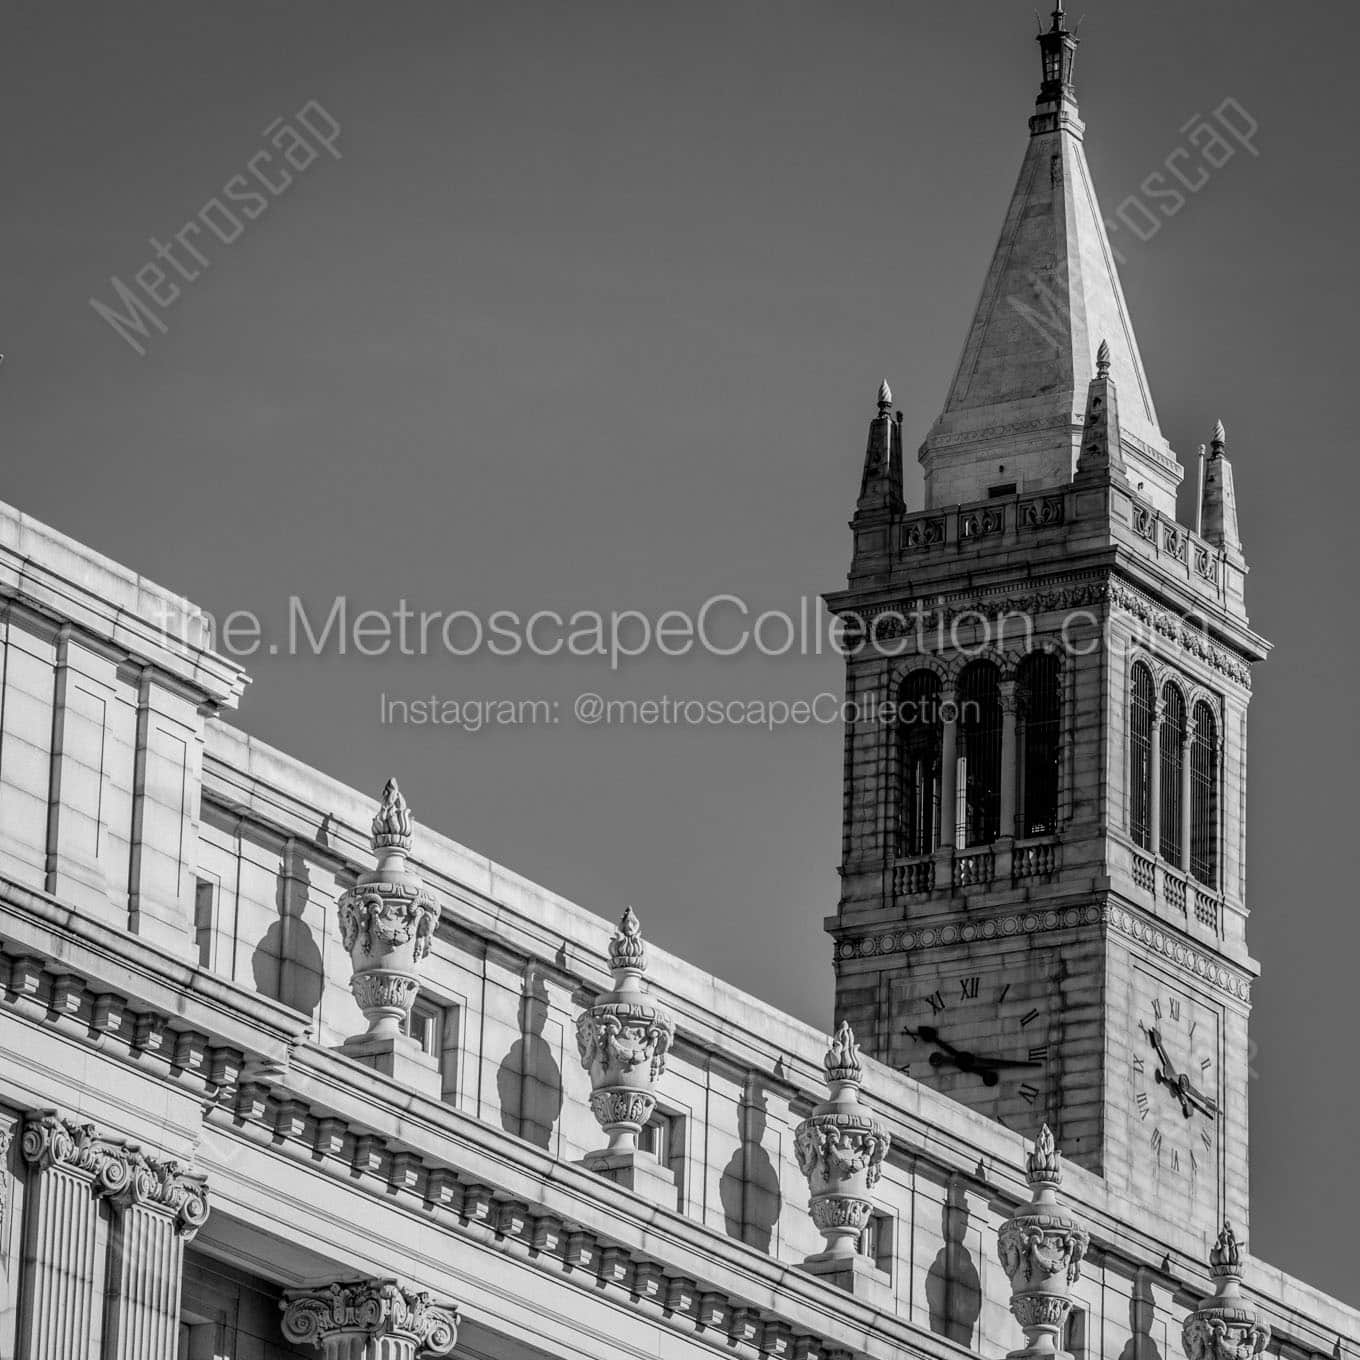 sather tower uc berkeley campus Black & White Office Art